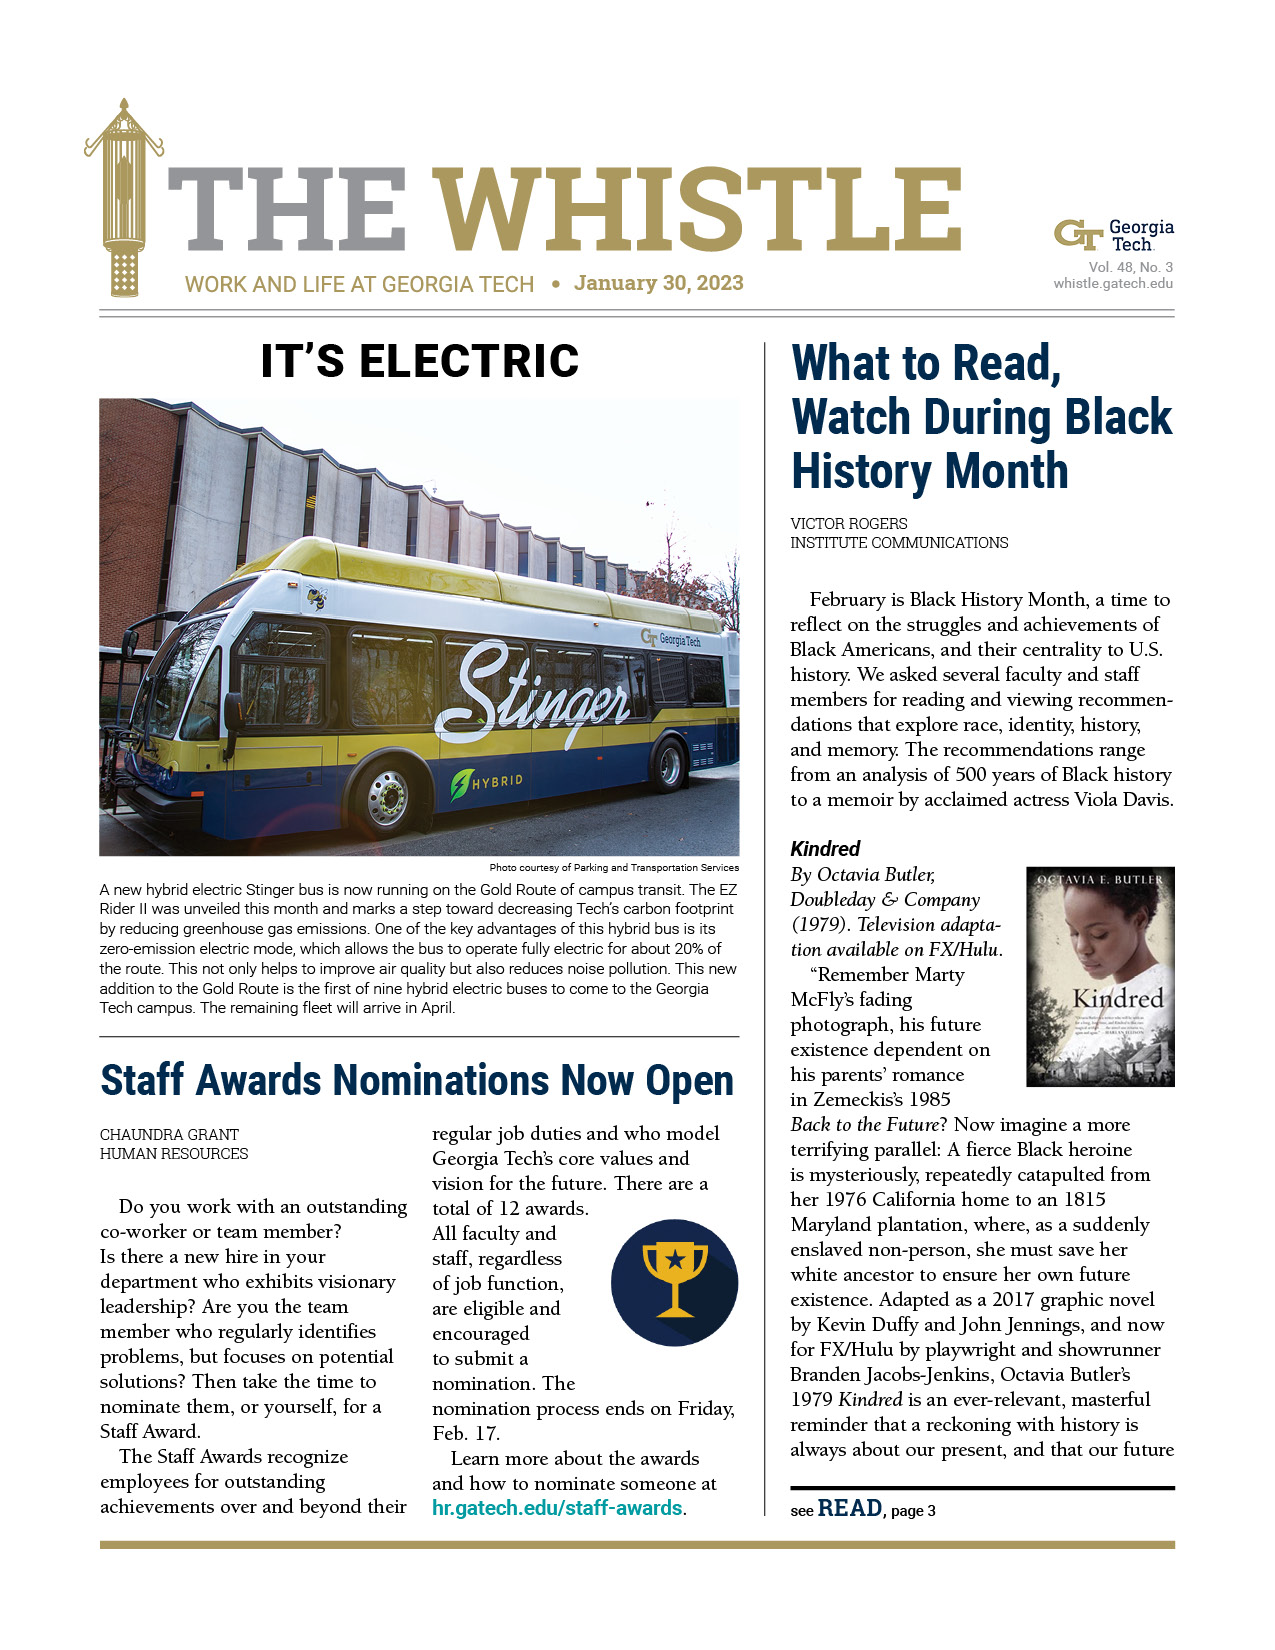 The Whistle - Jan. 30, 2023